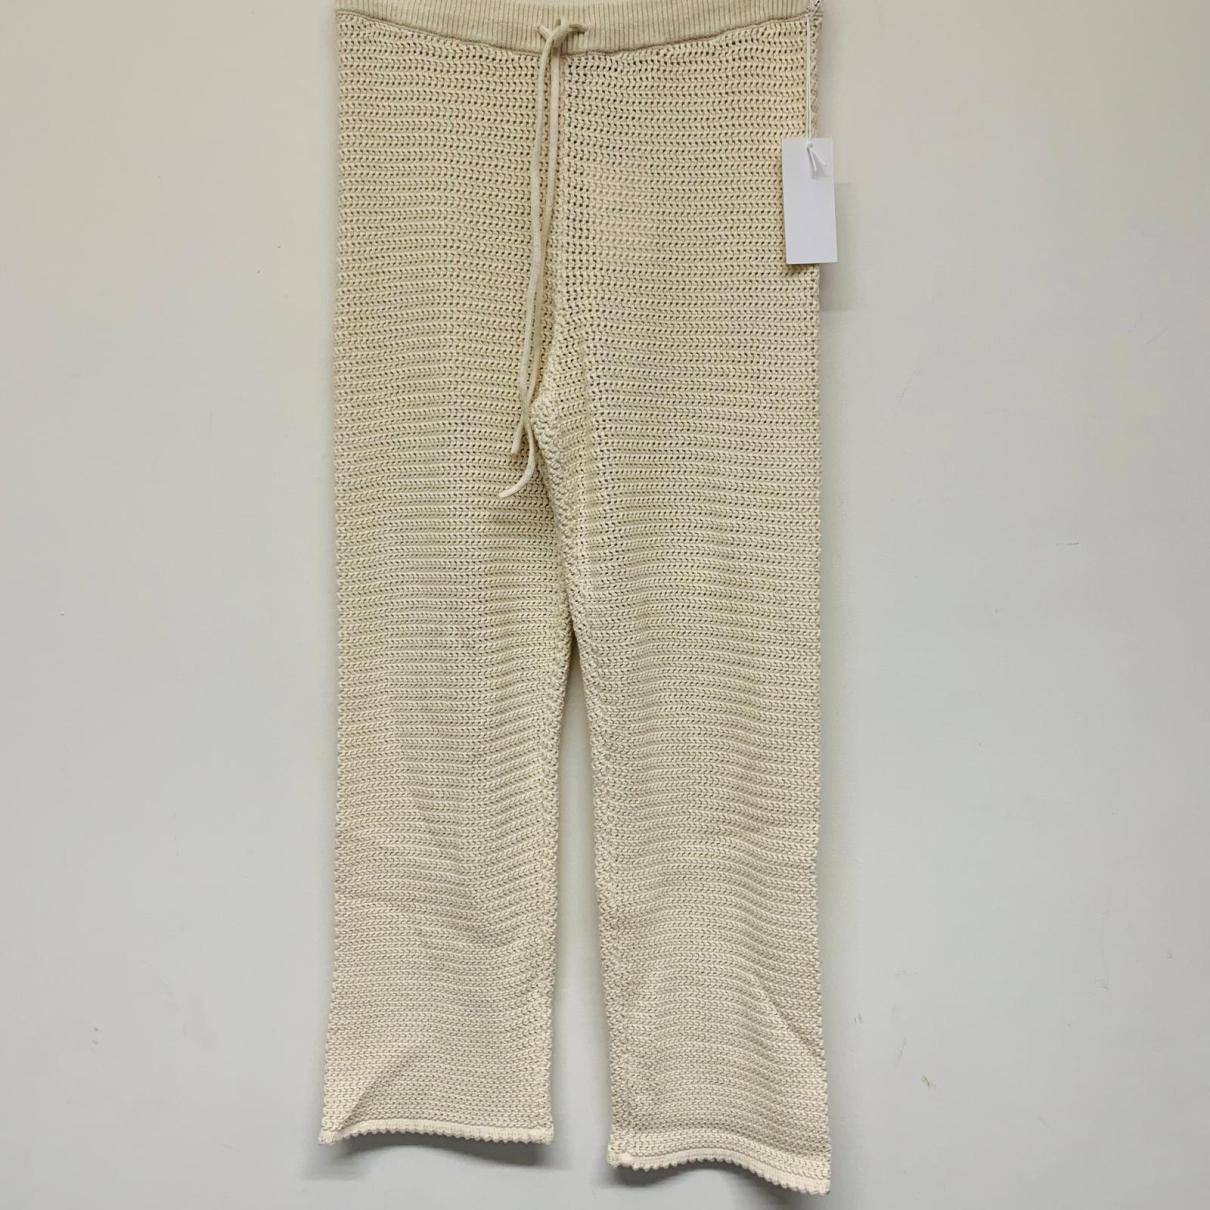 https://images.vestiairecollective.com/cdn-cgi/image/q=75,f=auto,/produit/white-synthetic-reformation-trousers-35136158-8_2.jpg?secret=VC-e9eee96a-a819-4431-ad12-d066be2626ef